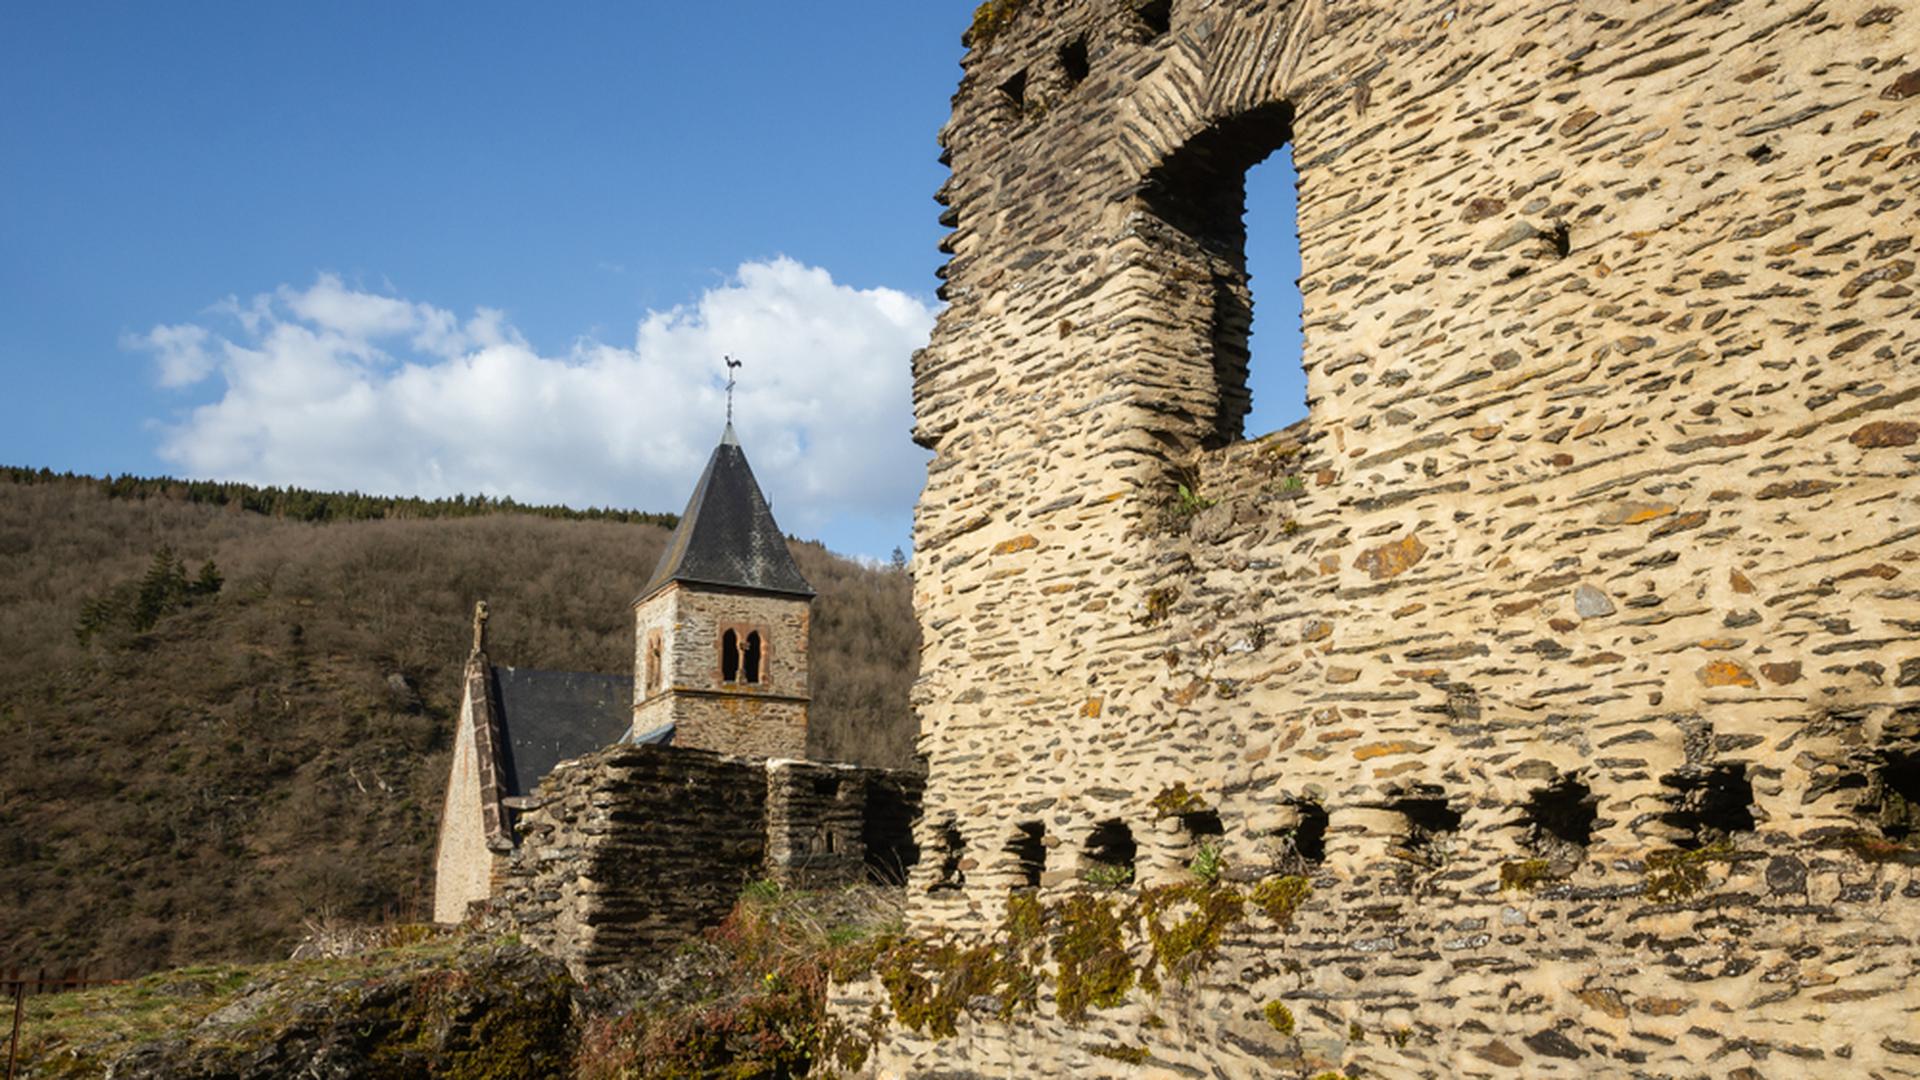 In the 1870s the castle was occupied by several families from the village